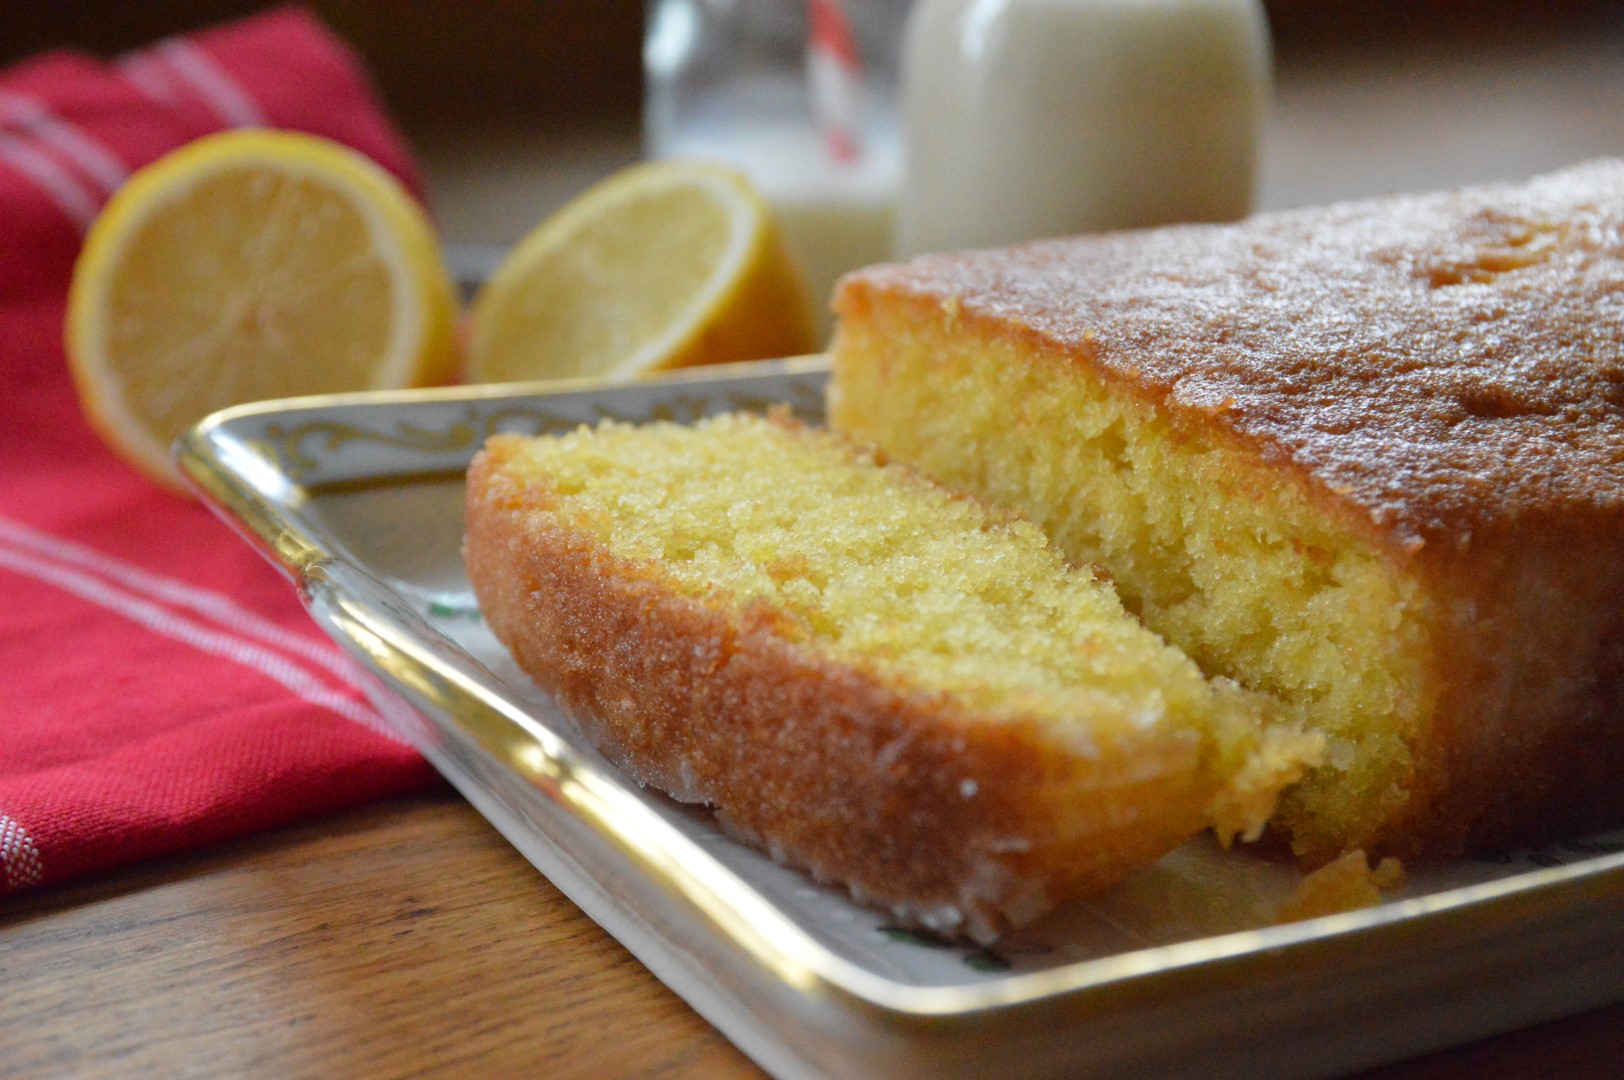 Lemon Drizzle Cake - gluten-free, wheat-free, egg-free, dairy-free. A delicious light sponge with a hint of lemon! www.intolerantgourmand.com